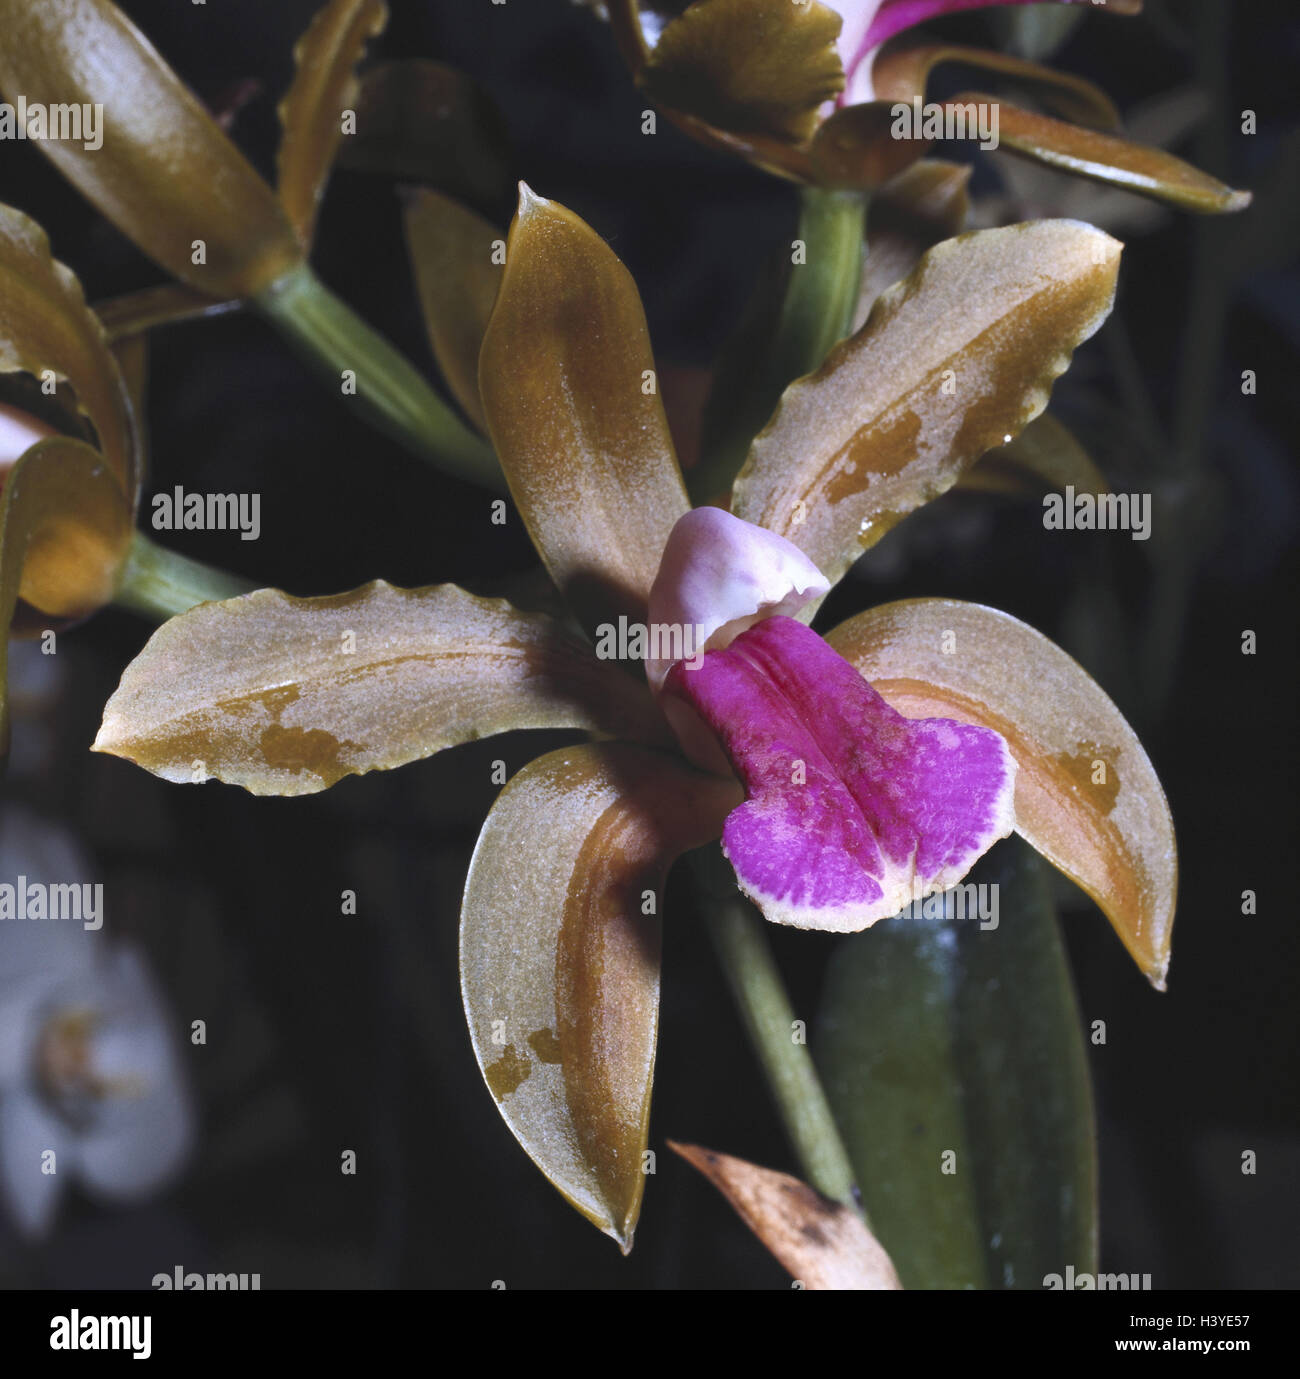 Orchid, Cattleya bicolor, blossom, close up, nature, botany, flora, plants, flowers, orchids, tropical orchids, orchid genus, Epidendrum, orchid plants, Orchidaceae, hybrids, Cattleya hybrids, Cattleya, blossom, orchid blossom Stock Photo